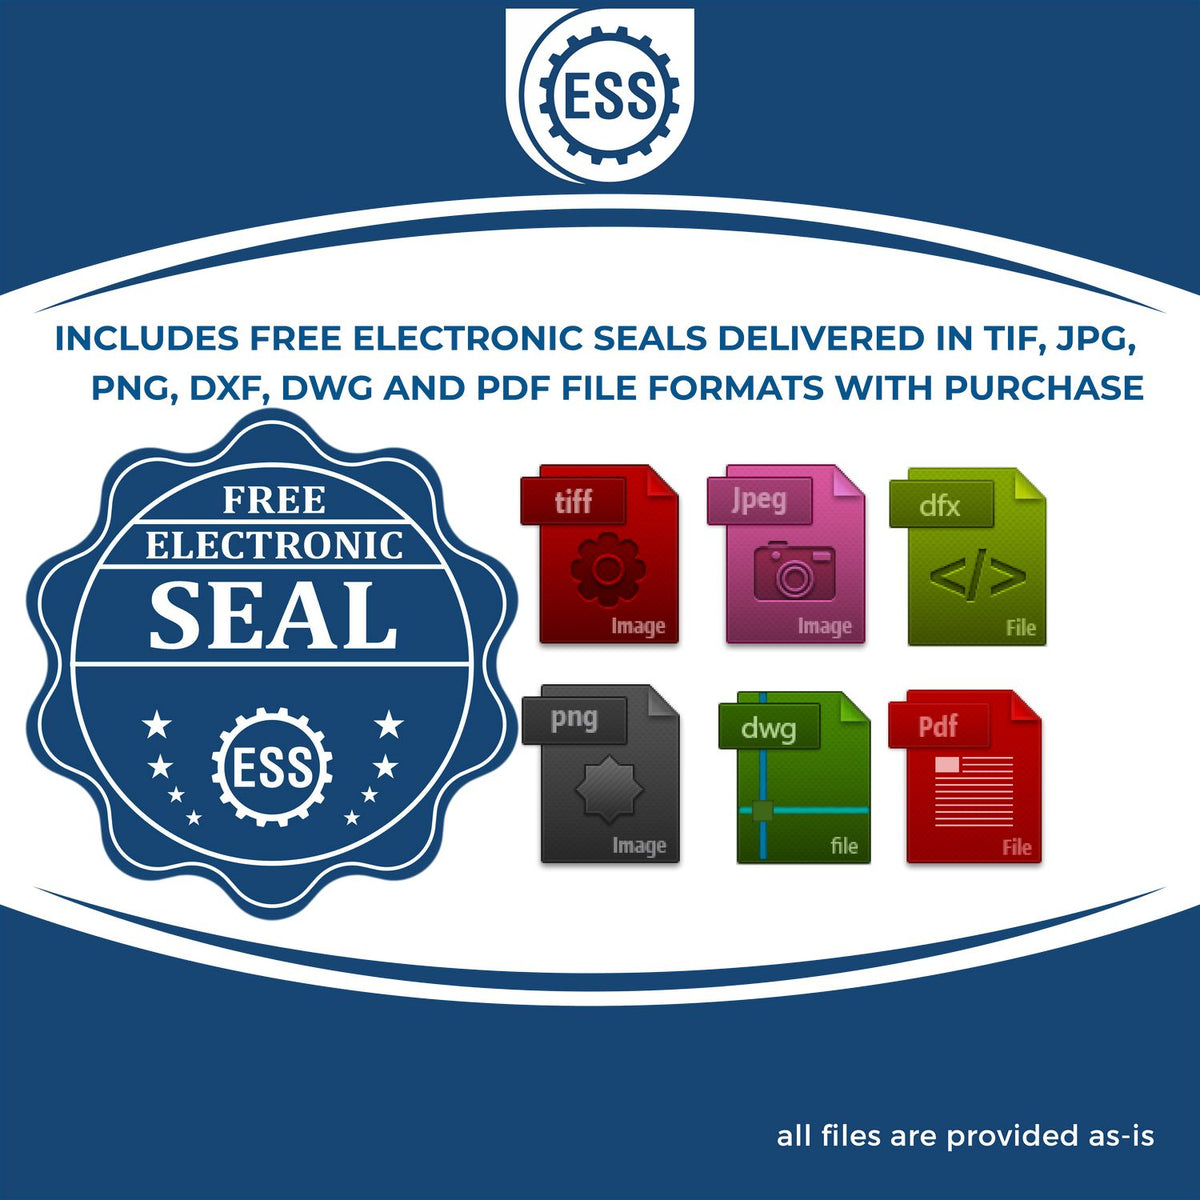 An infographic for the free electronic seal for the Premium MaxLight Pre-Inked Texas Geology Stamp illustrating the different file type icons such as DXF, DWG, TIF, JPG and PNG.